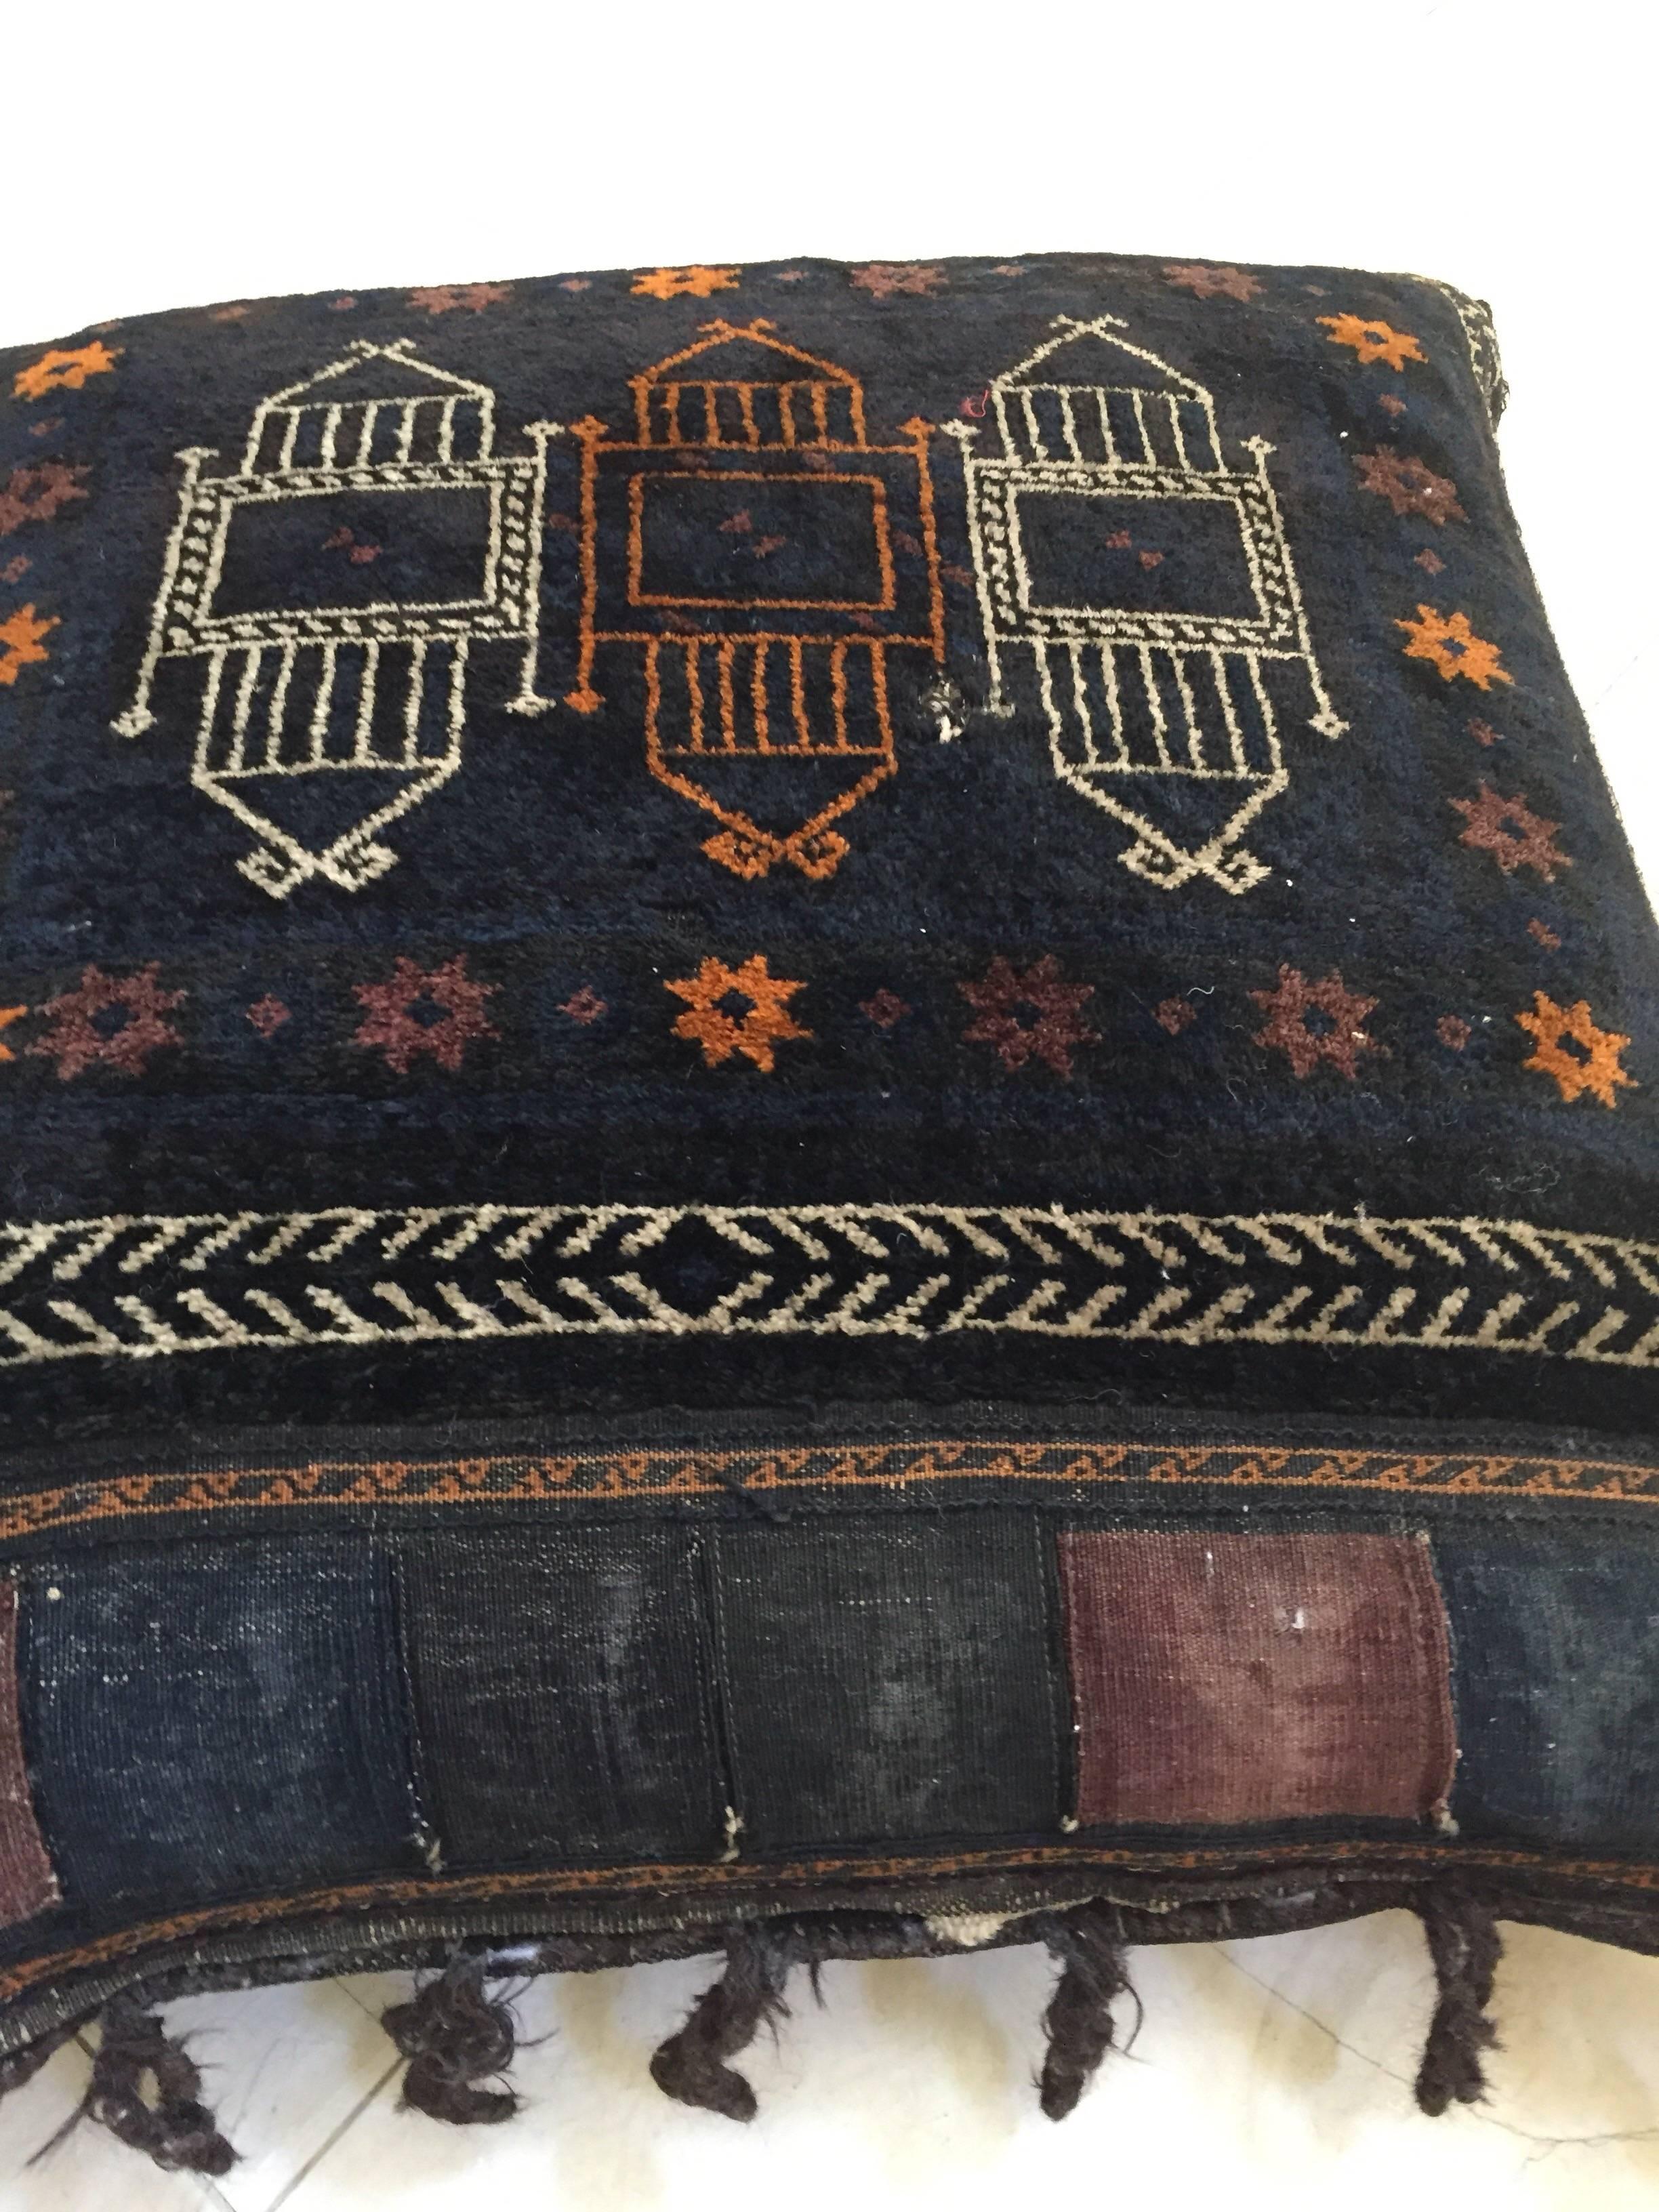 Handwoven Afghan Baluch Saddle Tribal Bag, 1880s Large Floor Pillow In Good Condition In North Hollywood, CA